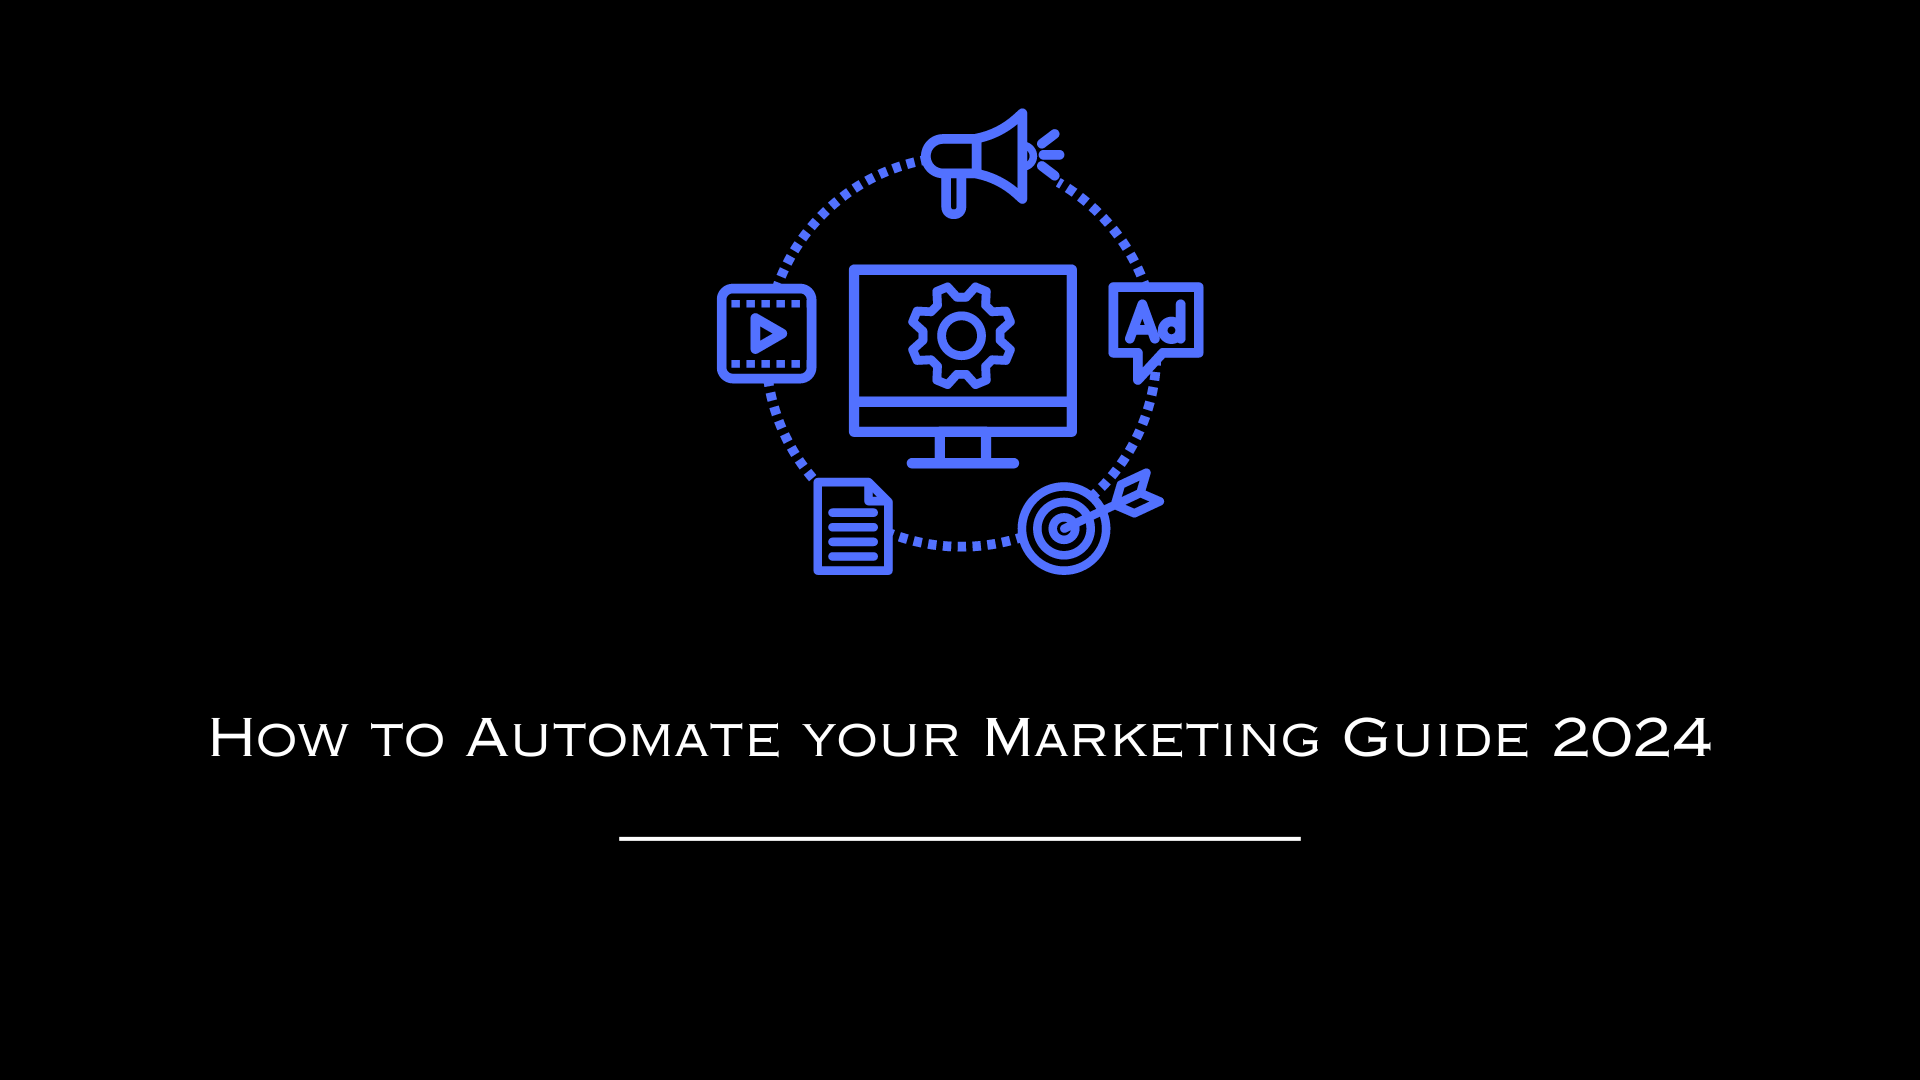 How to Automate your Marketing Guide 2024